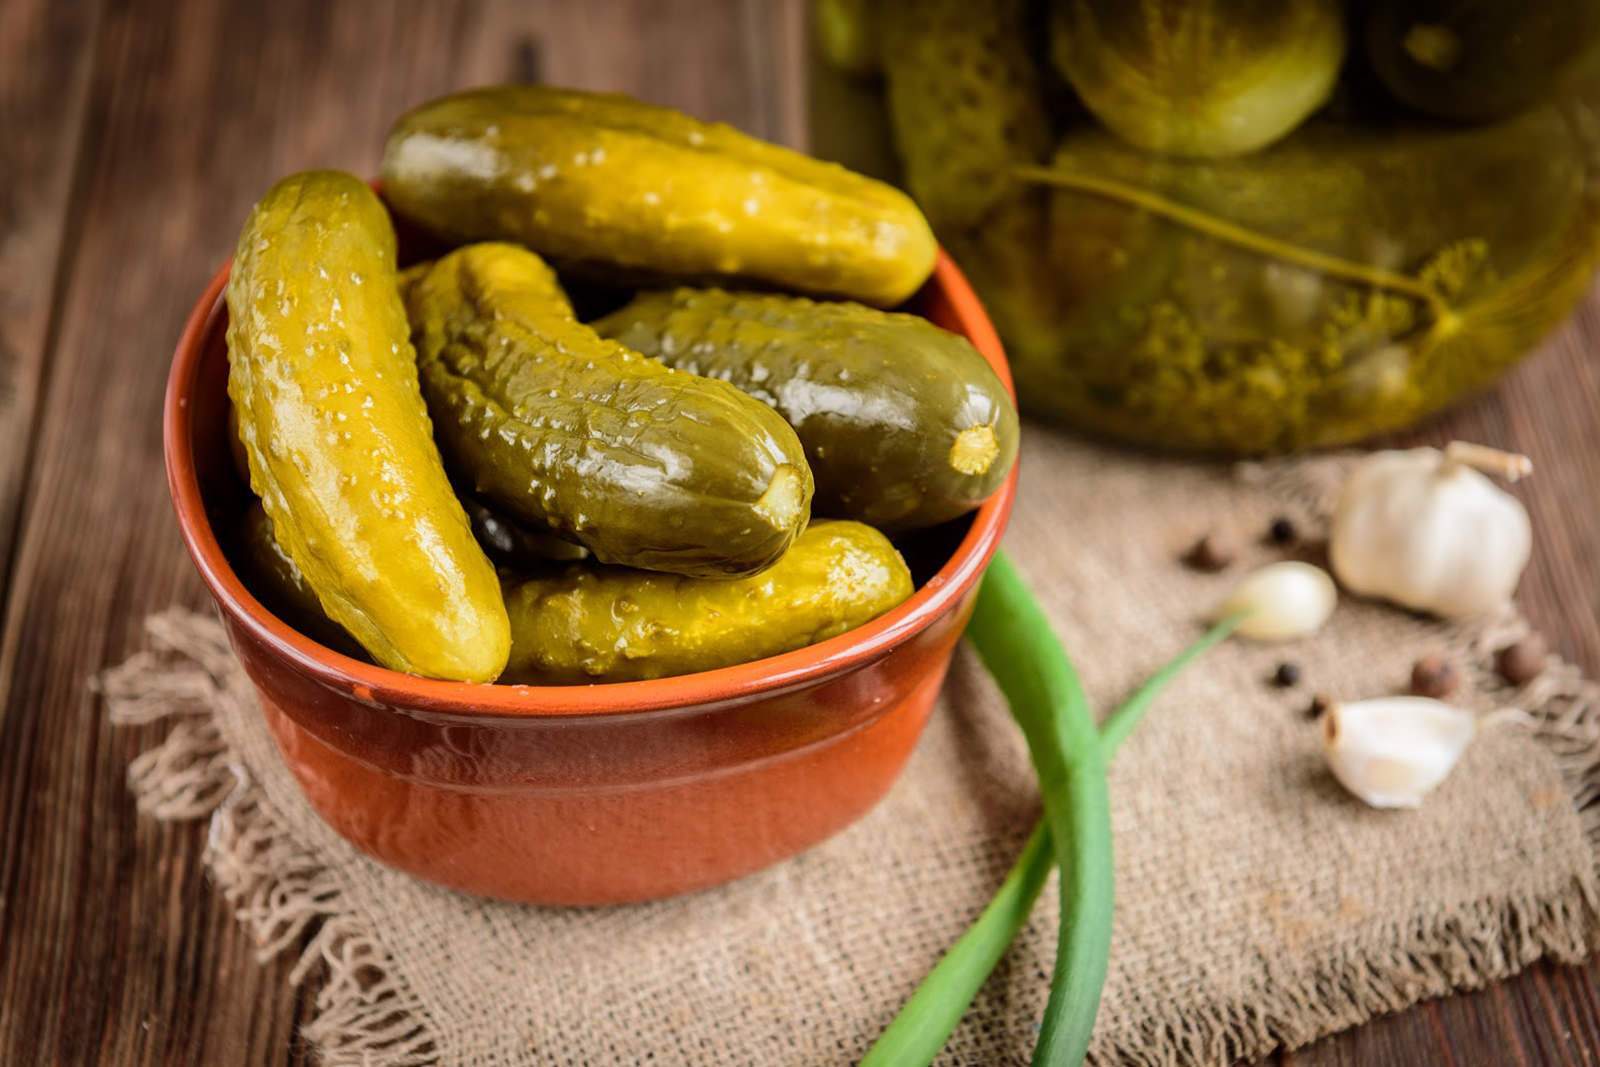 Cool and Crunchy Dill Pickles